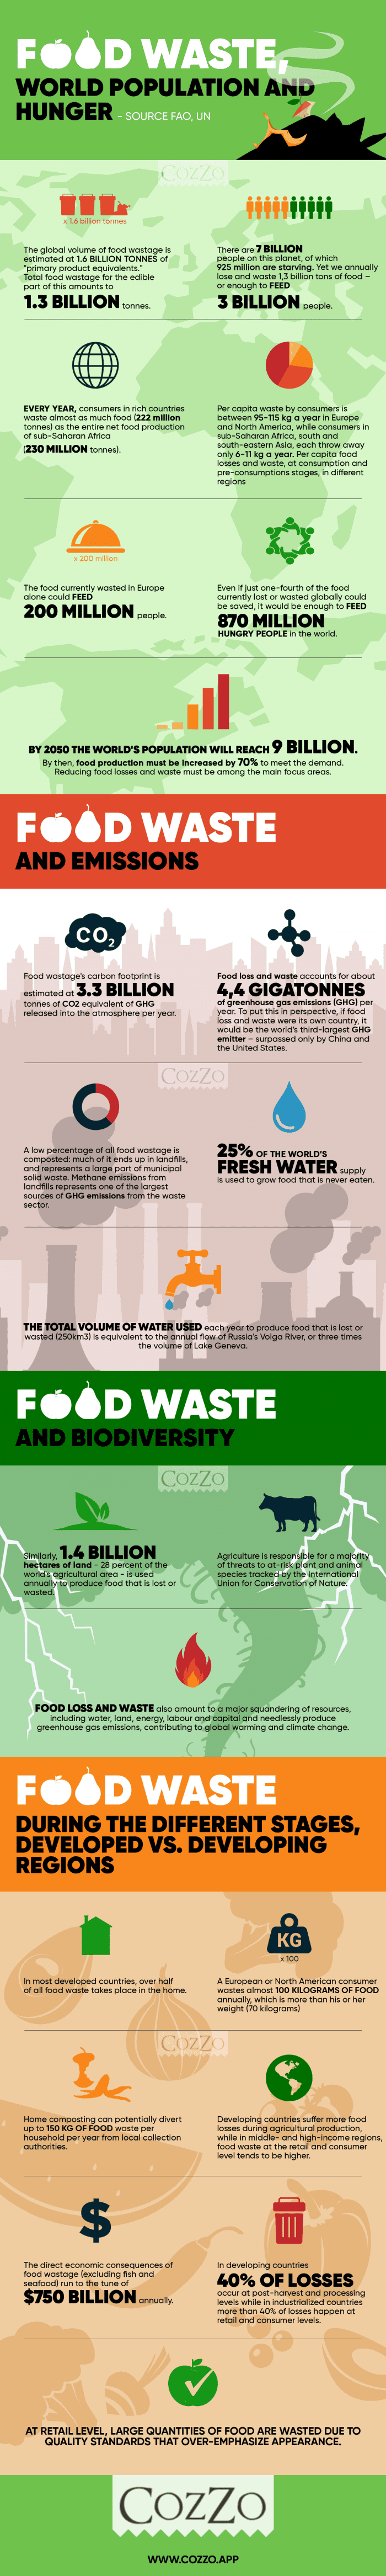 Food Waste, World Population and Hunger #infographic